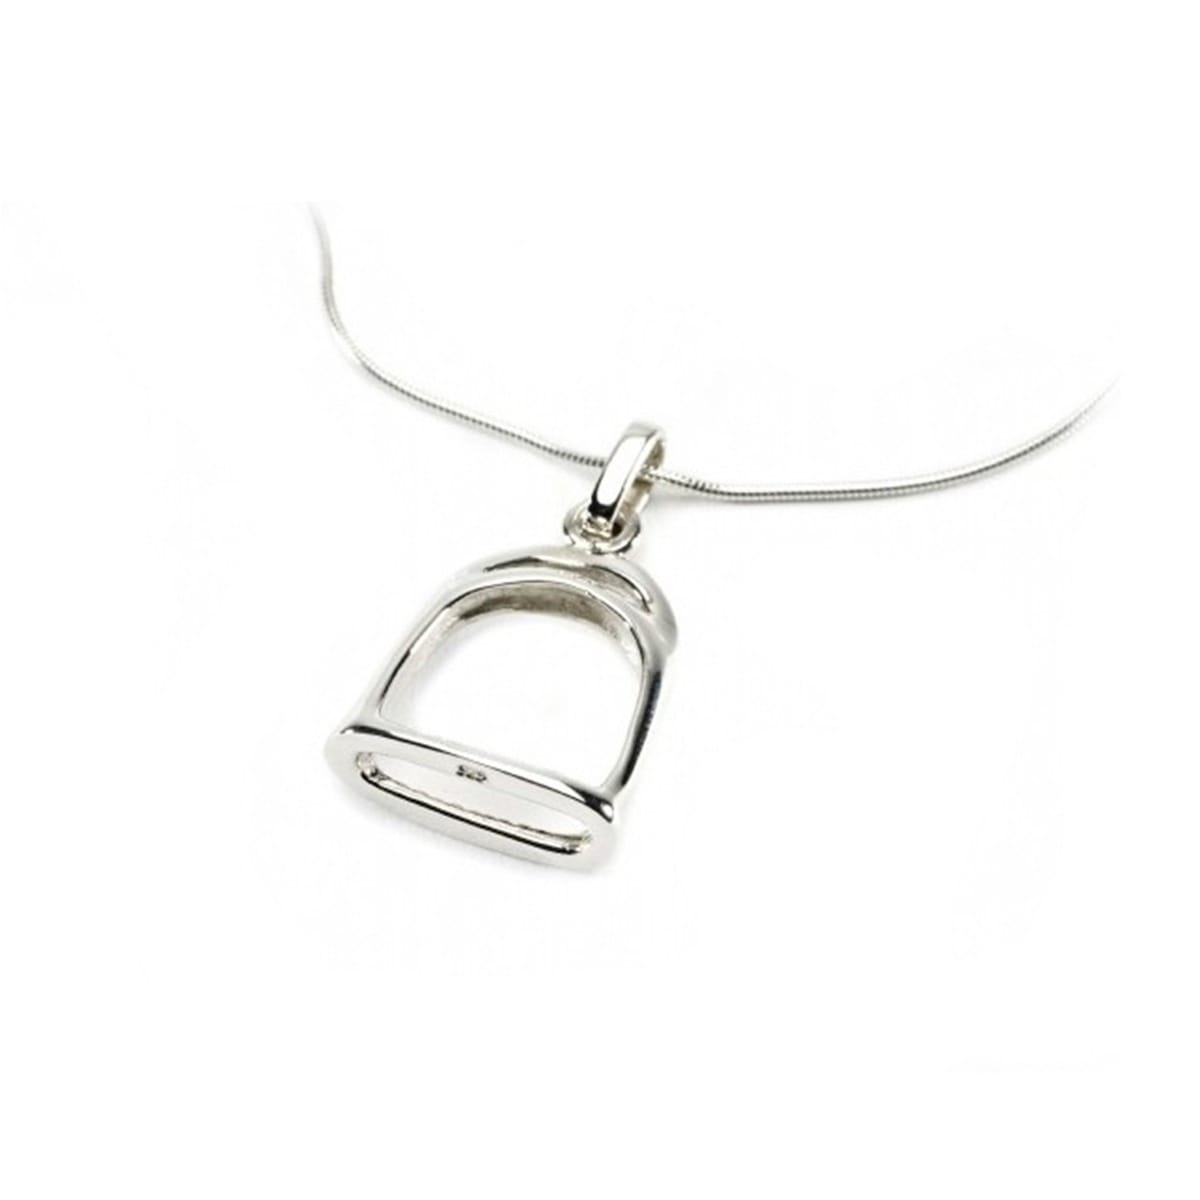 Hiho Silver Sterling Silver Stirrup Pendant